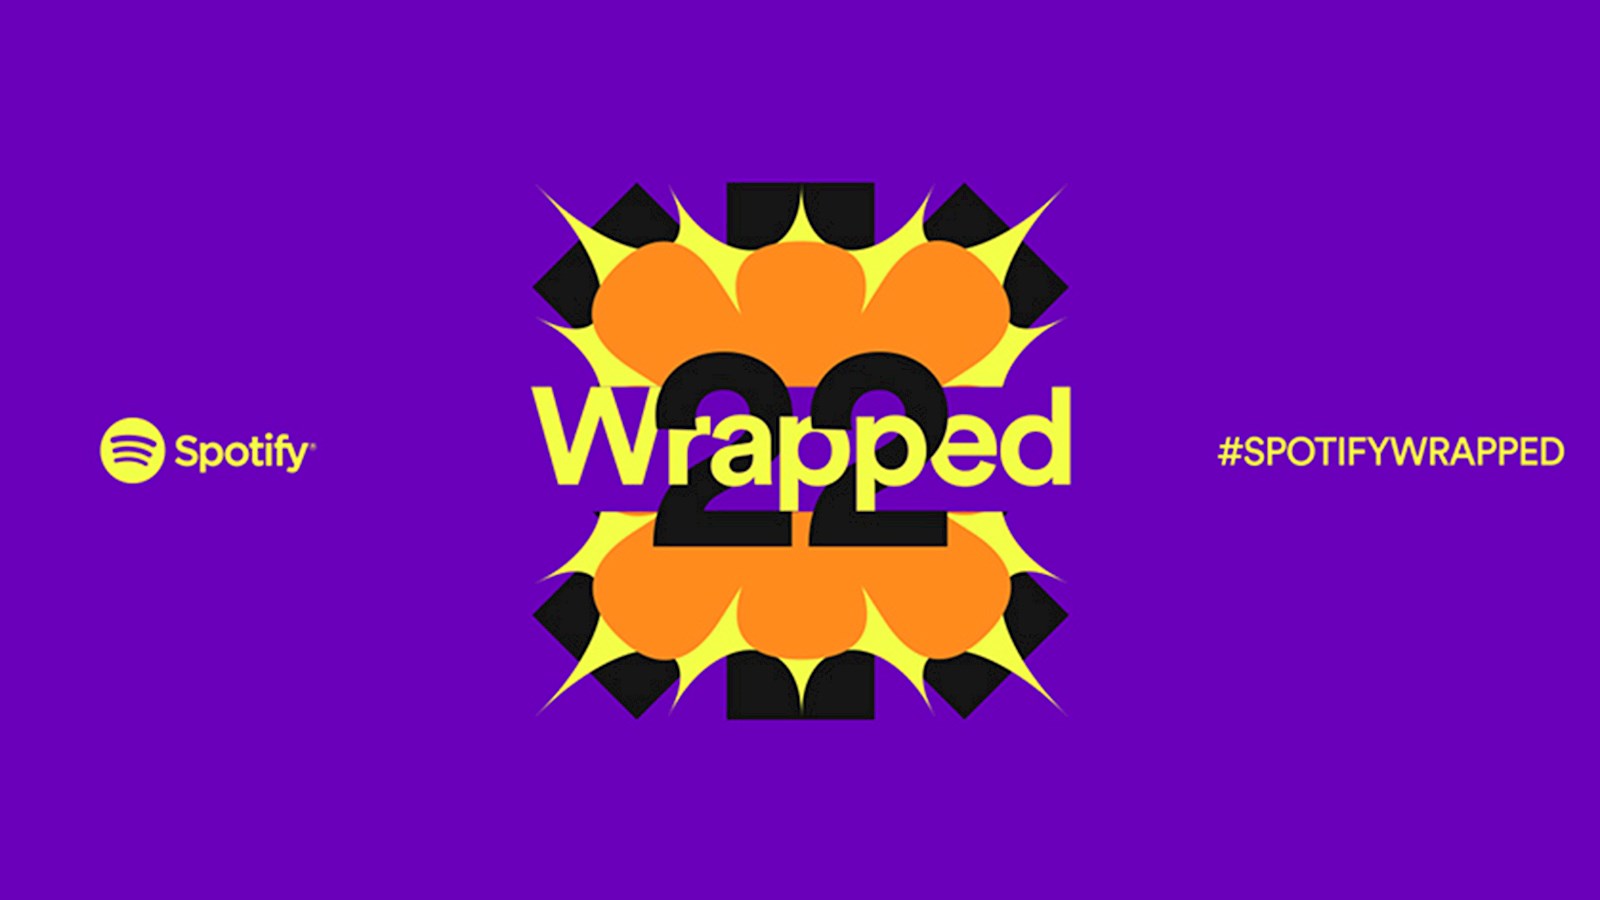 Spotify Wrapped 2022 in logo in bright yellow and orange on a bright purple background